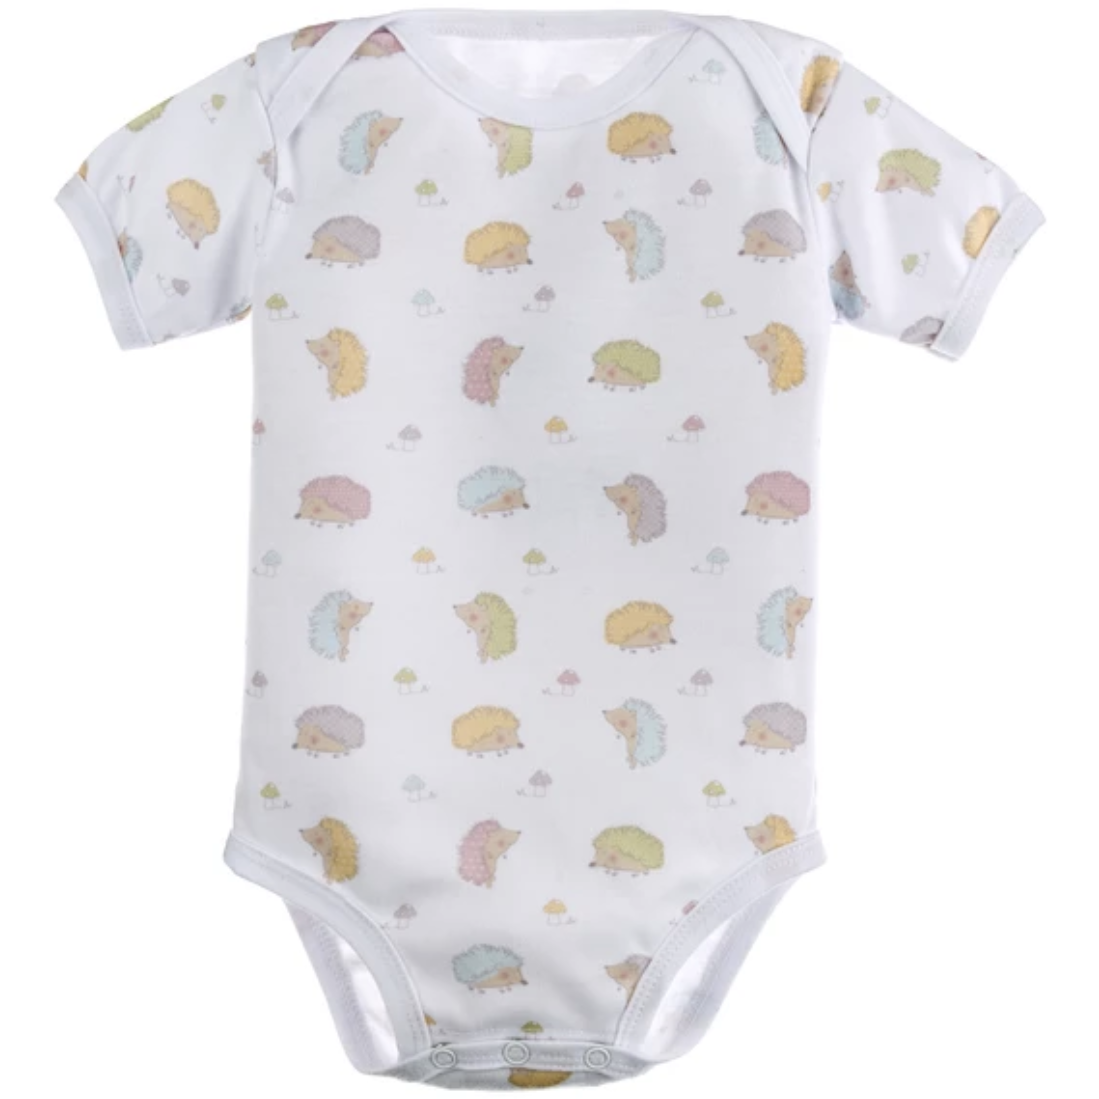 Roly Poly Diaper Shirt by Ganz